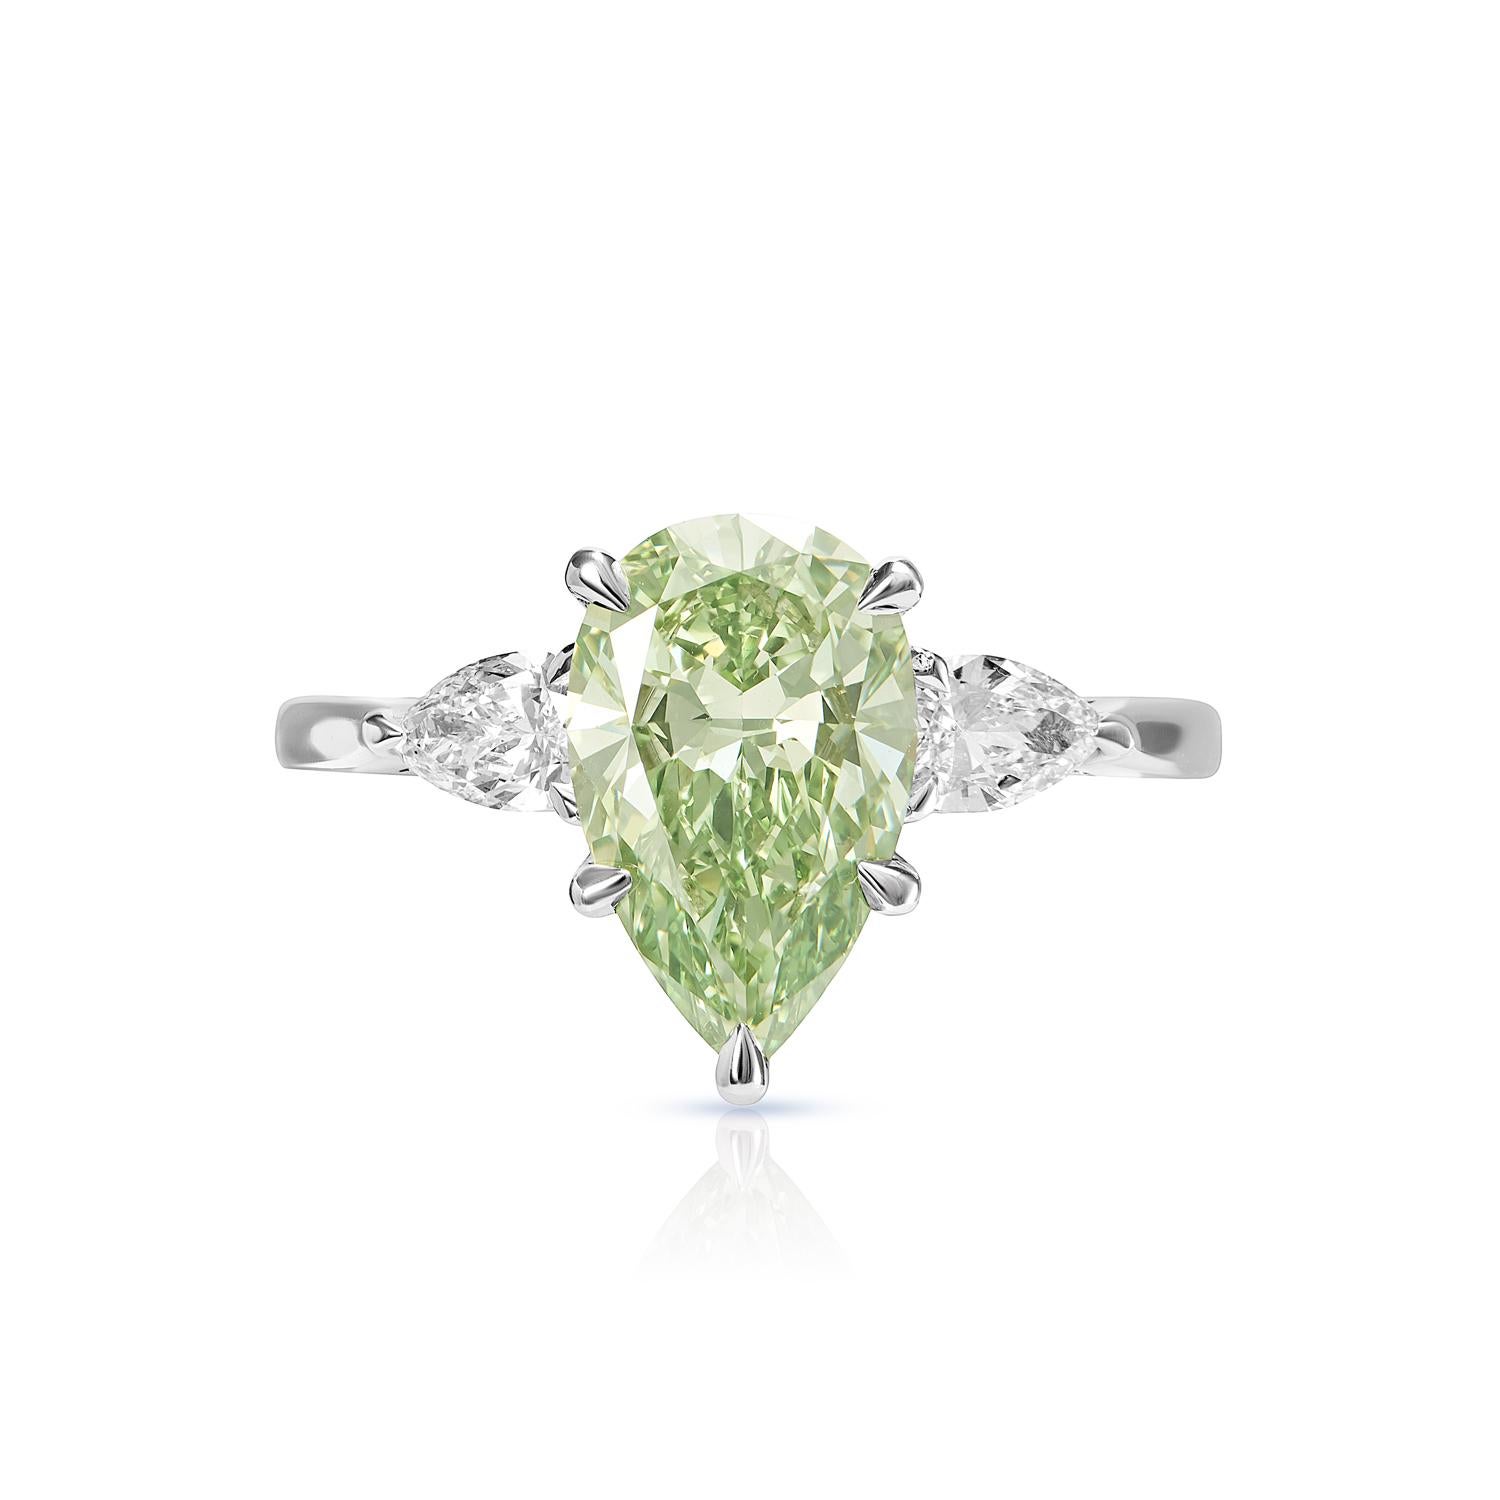 This gorgeous platinum ring is set with a beautiful pear-shaped diamond that sparkles brilliantly. With a weight of 2.02 carats, the stone is of very high quality and has been graded VS2 certified GIA. At its center, the dazzling diamond is accented